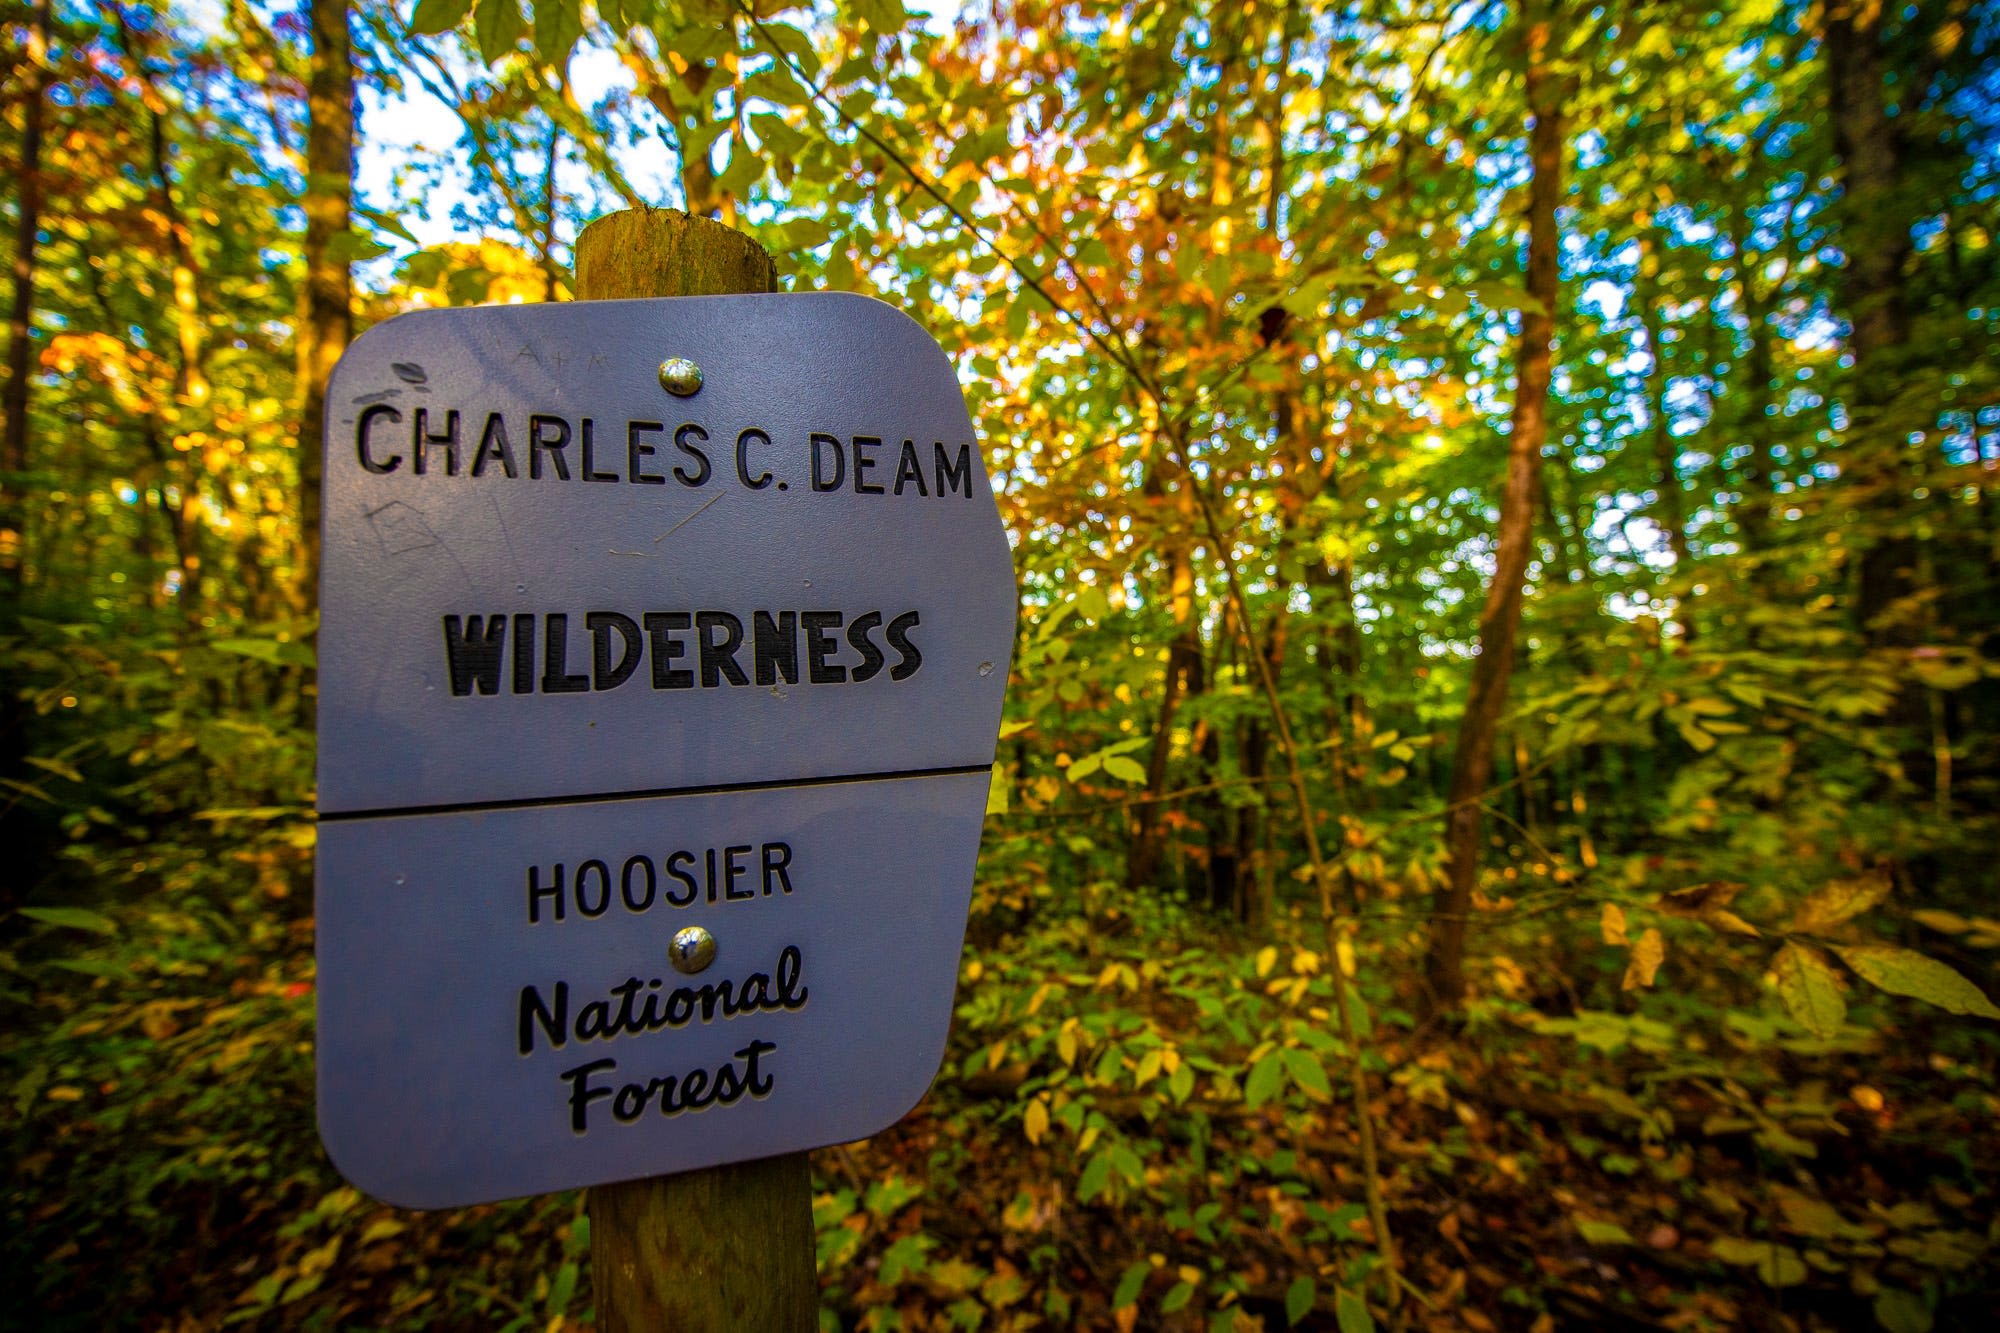 Rep. Erin Houchin introduces bill in House to expand wilderness, add rec area in Indiana